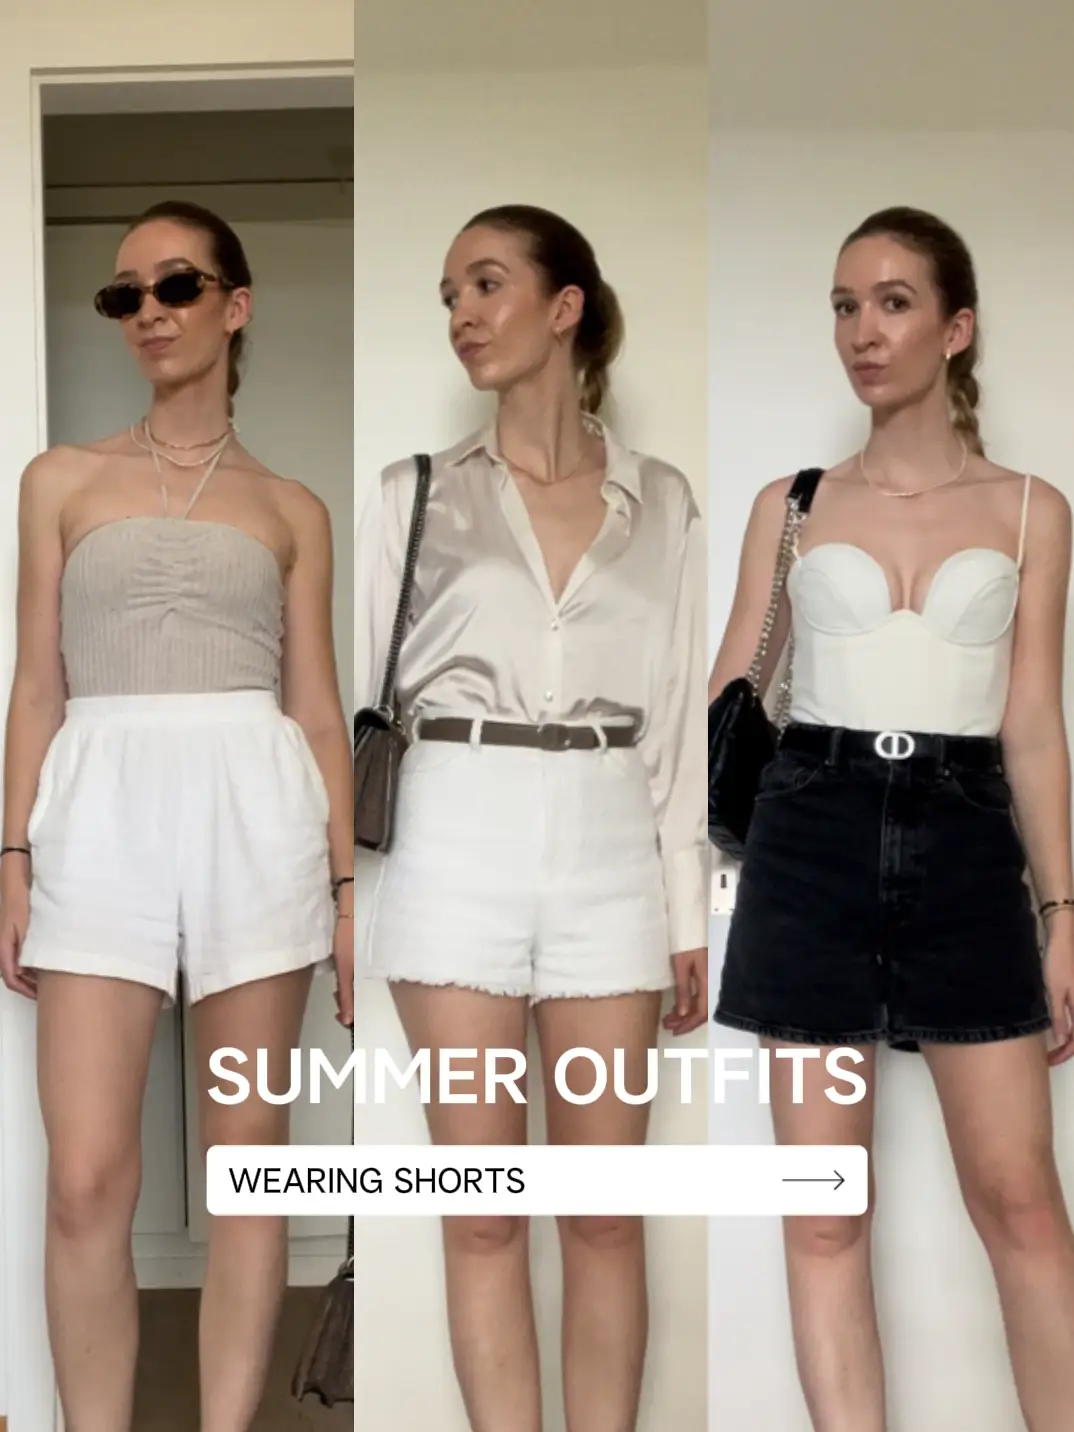 Summer outfits with shorts, Gallery posted by Pauline Matter